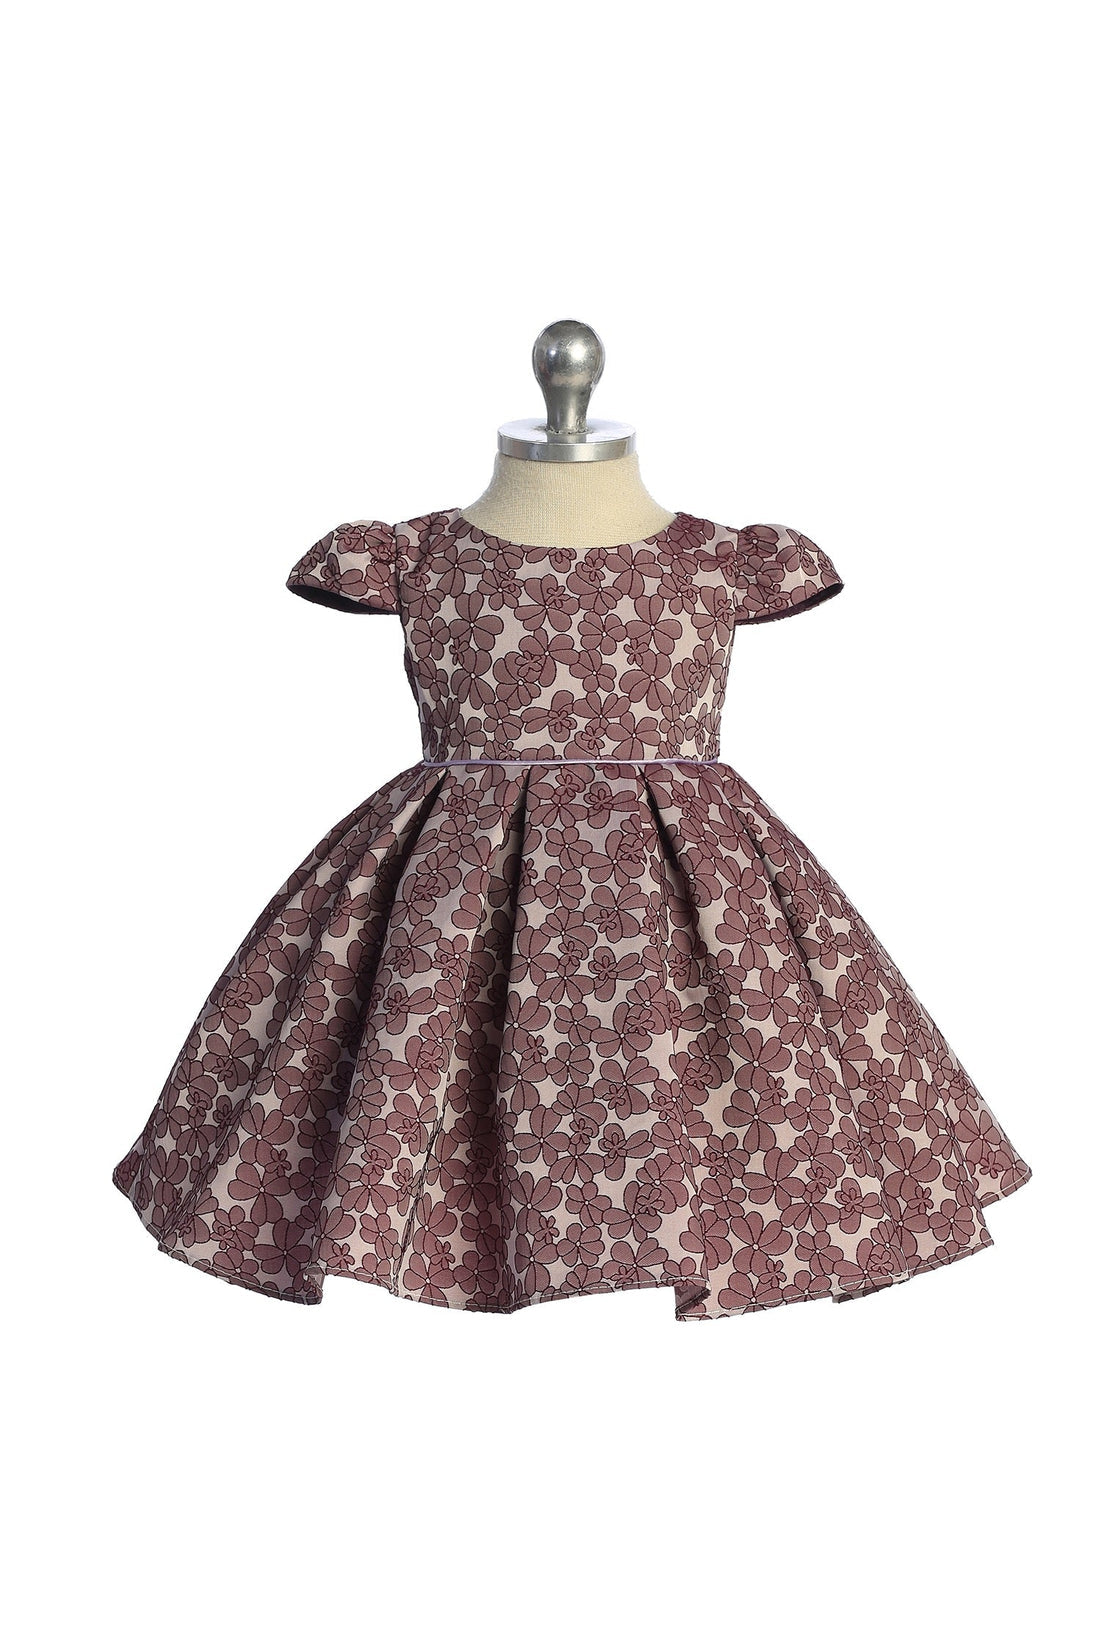 Baby Floral Sleeve Girl Party Dress by AS548B Kids Dream